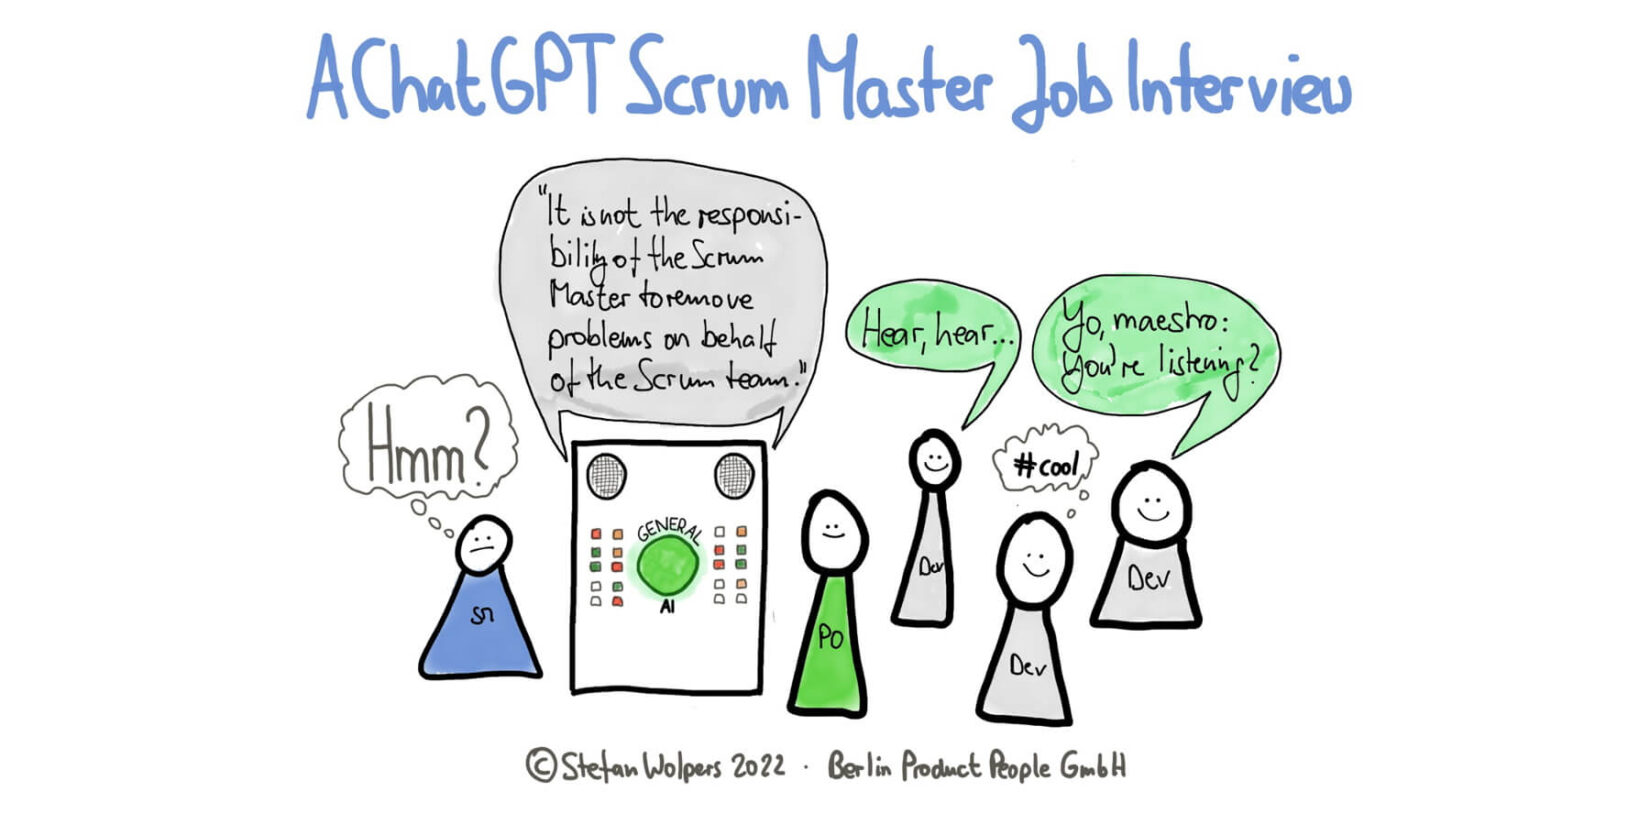 A ChatGPT Job Interview for a Scrum Master Position — Age-of-Product.com